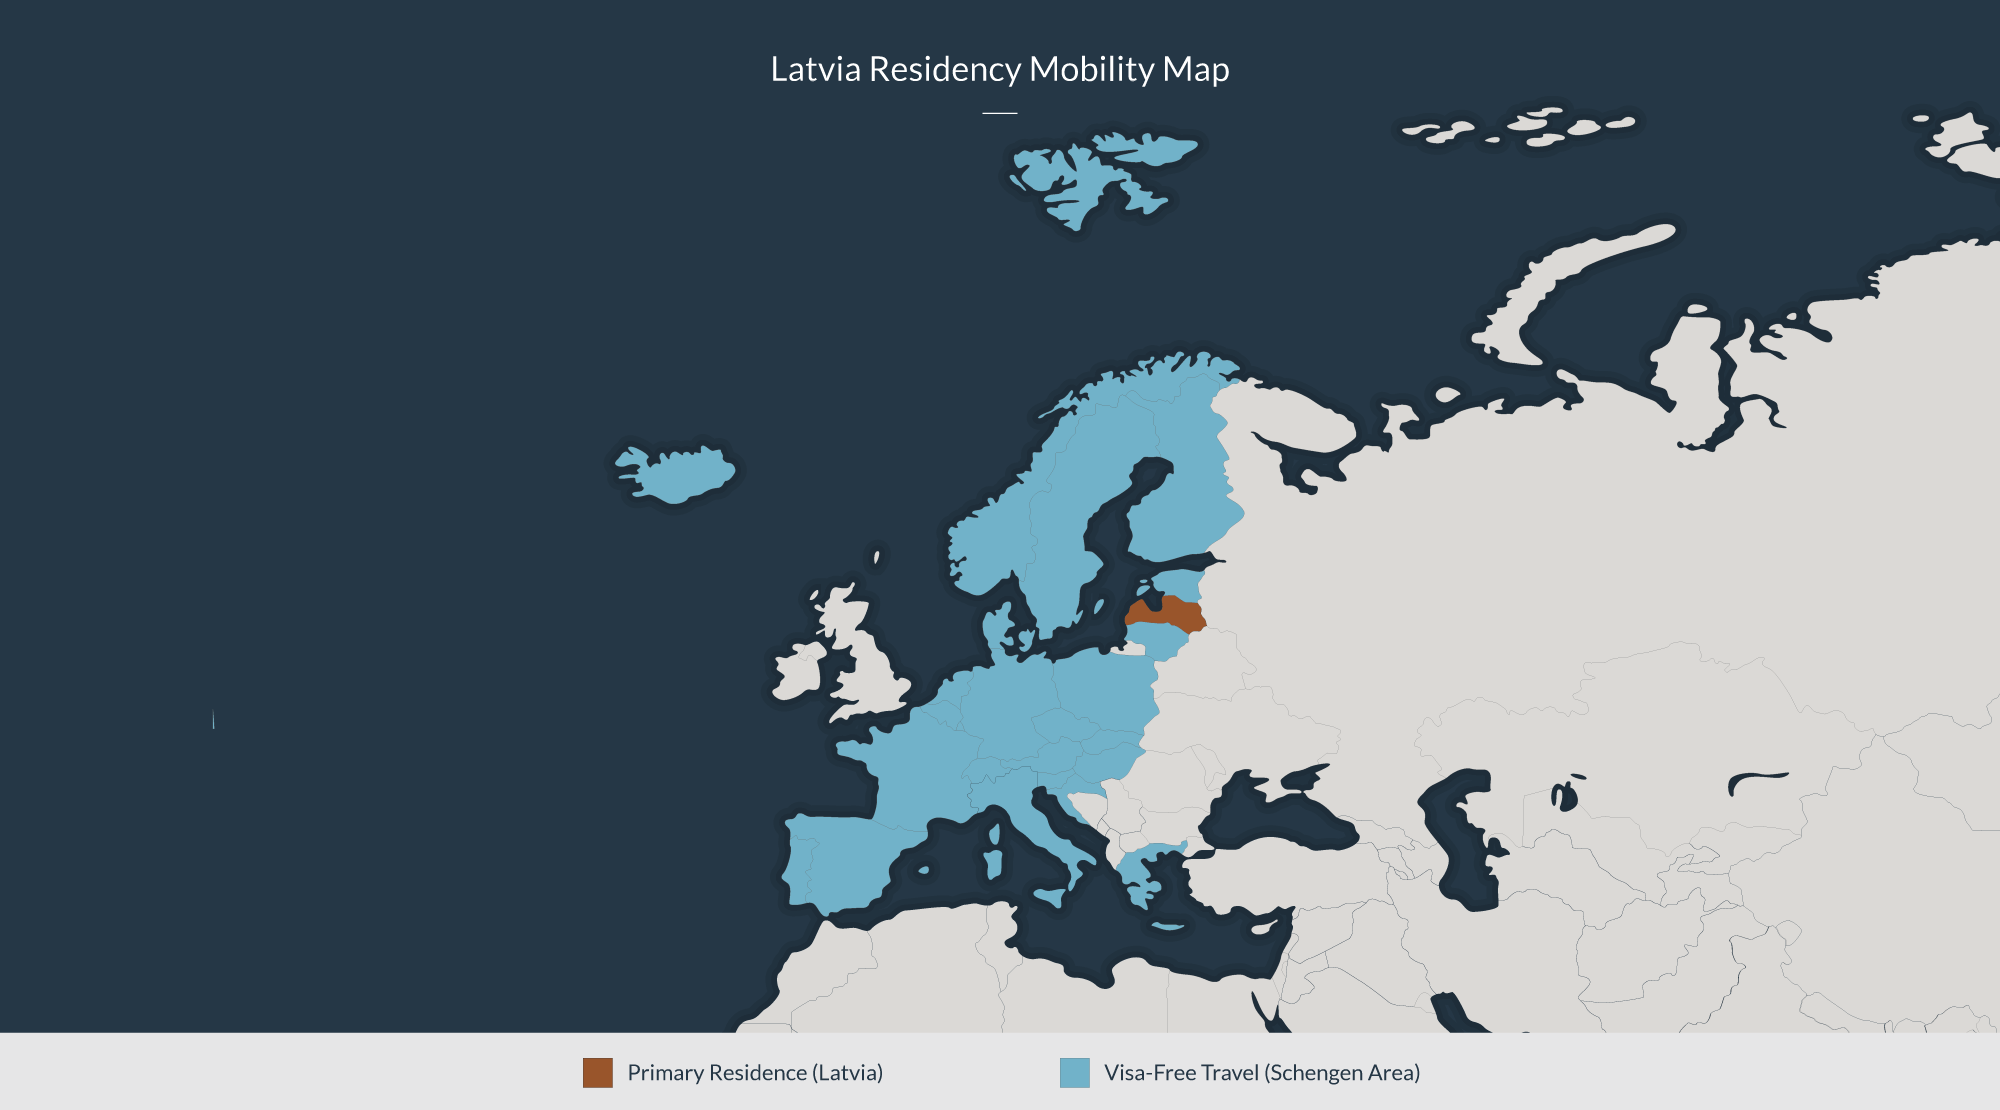 Latvia residency mobility map: Primary residence in Latvia, Visa-free travel across the Schengen area.